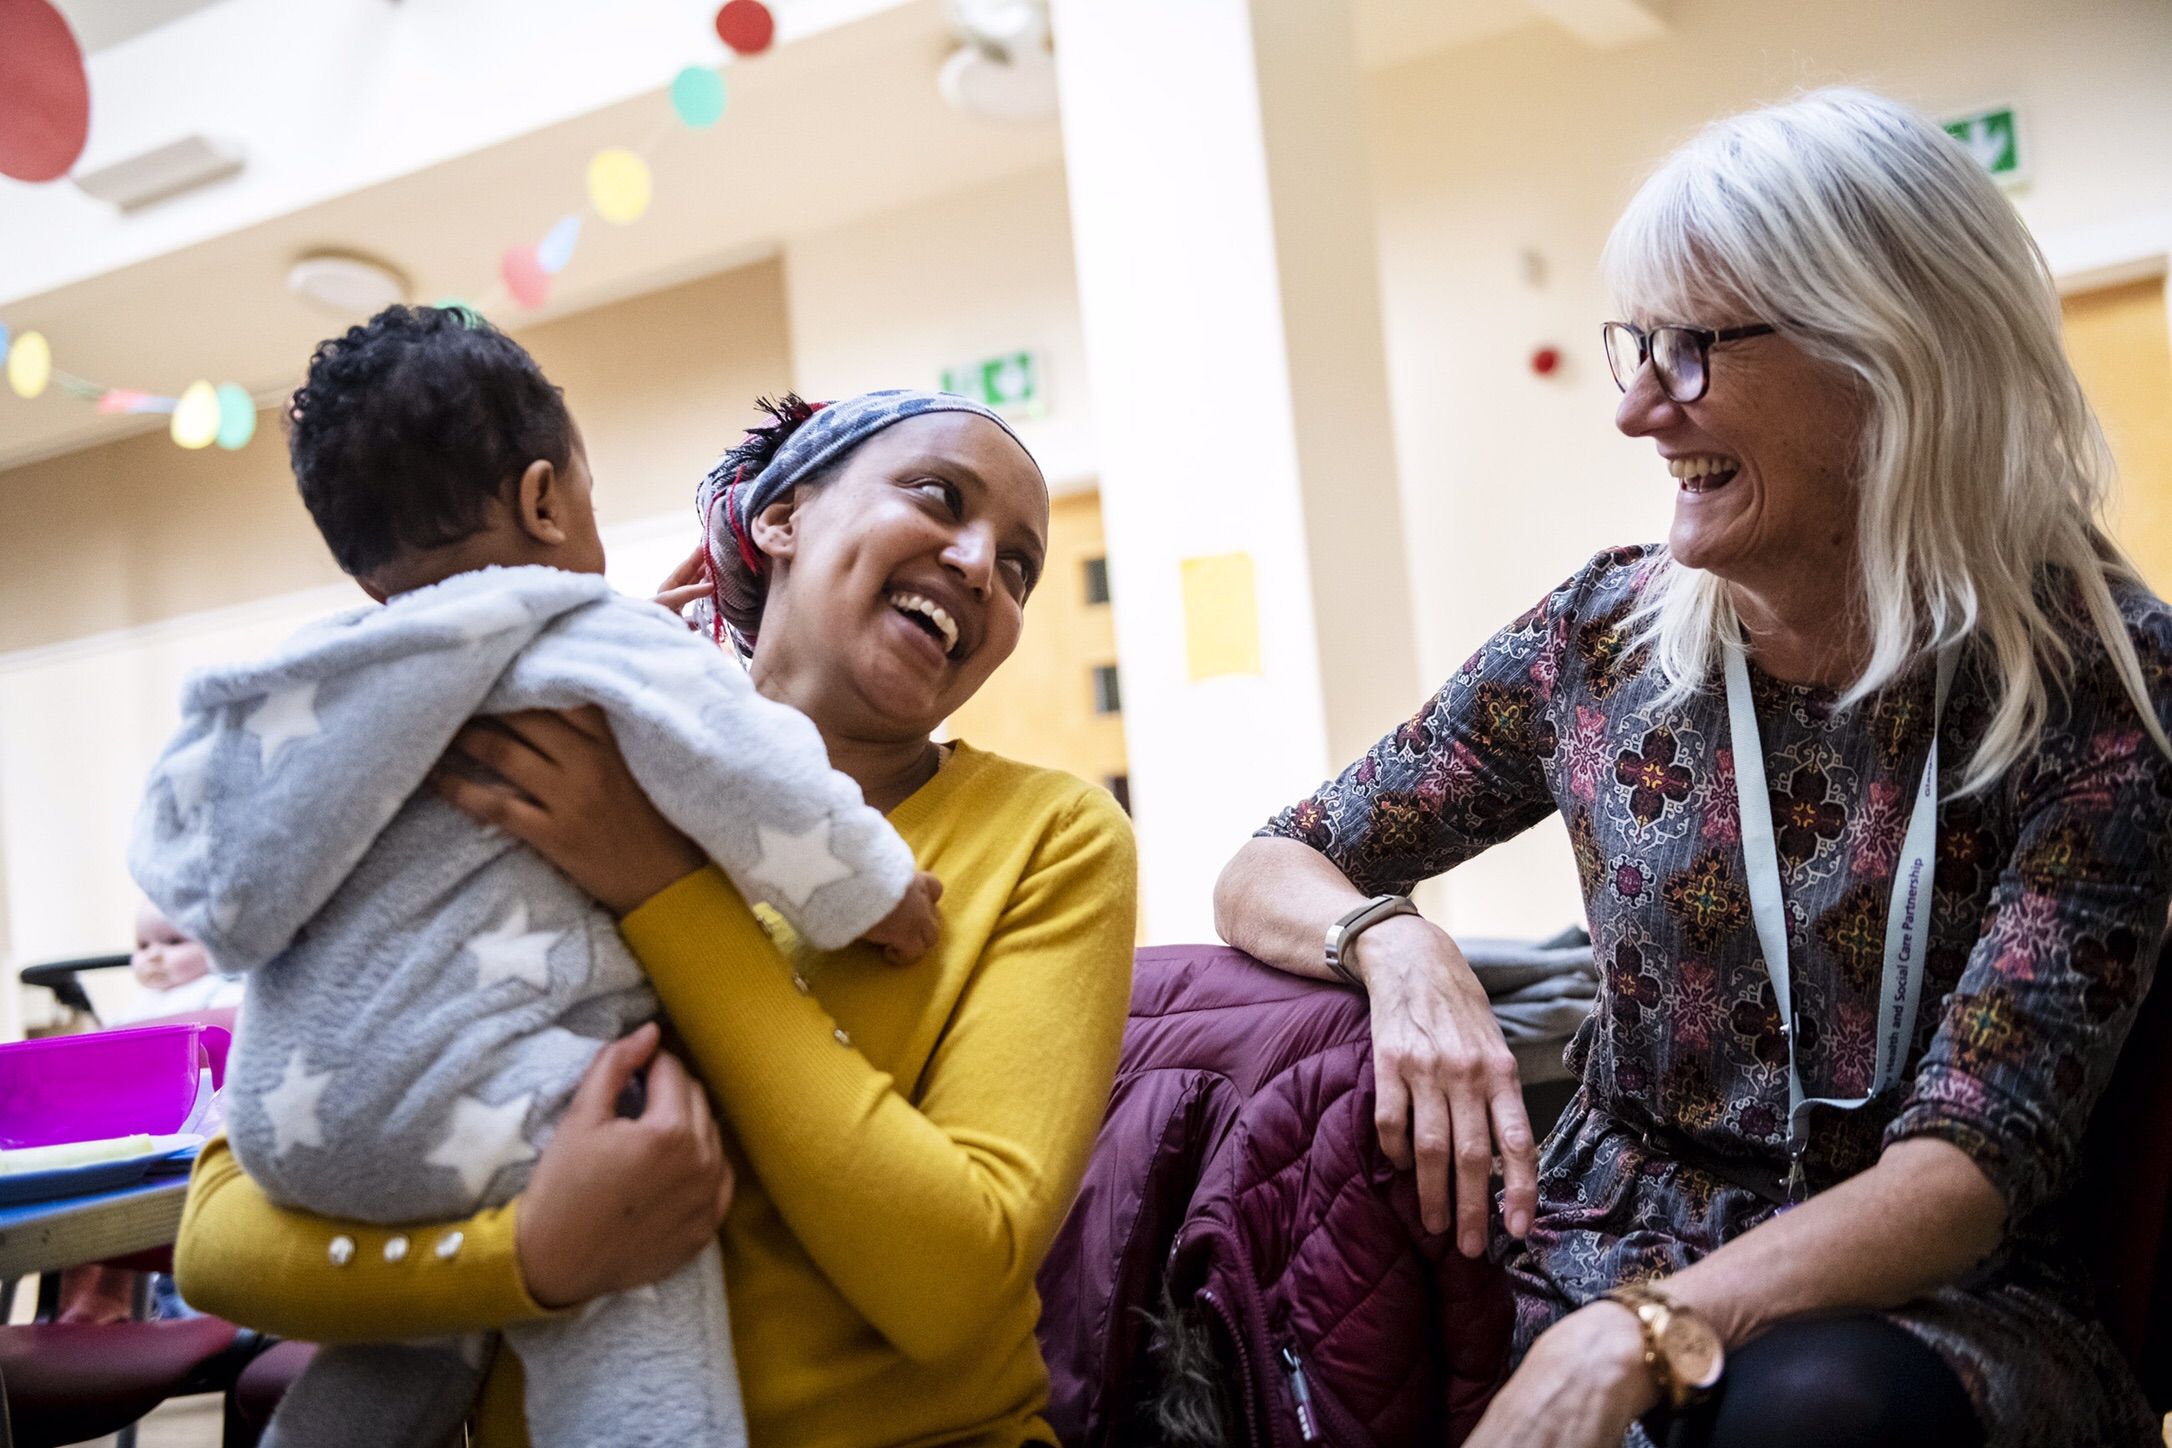 Eliad Abrha, 7 months, left,  is held by his mother Hanna Abrha, of Parkhead, a neighborhood of Glasgow, Scotland, center, as she speaks and jokes with Janet Tobin, health improvement lead with the National Health Service, right, at Cafe Stork, Tuesday, Oct. 21, 2019, at Parkhead Congregational Church in Glasgow. Cafe Stork is a free networking lunch for families in the disadvantaged East End who are expecting or new parents. Image by Michael M. Santiago. United Kingdom, 2019.